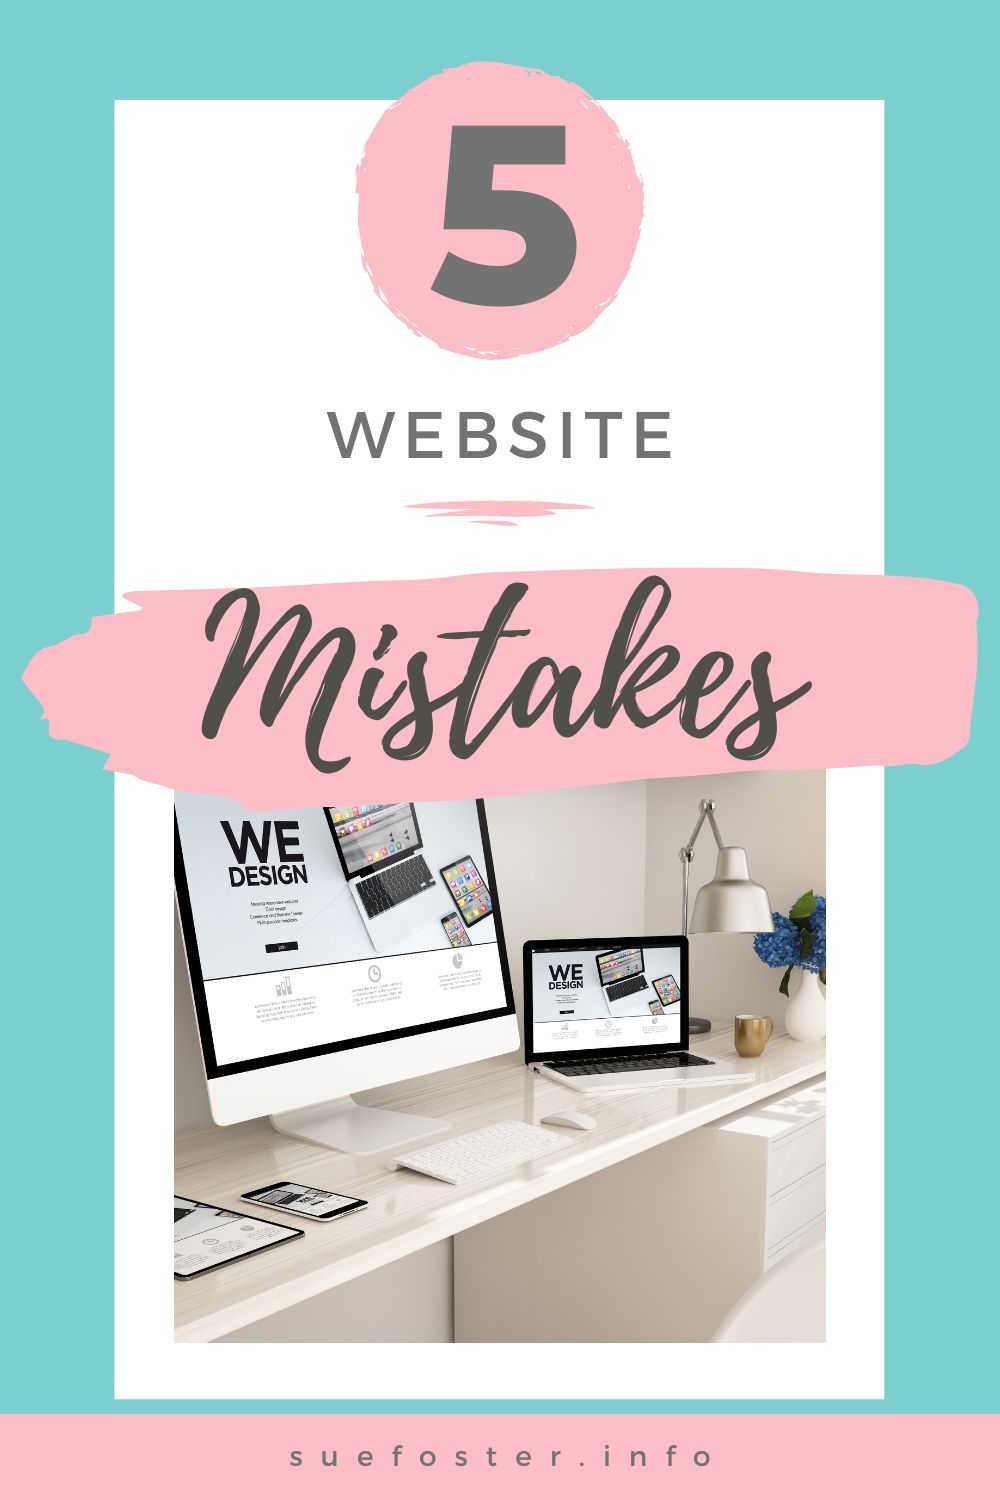 You don’t want your business website to end up exactly like everyone else’s out there, so avoid these website mistakes and reap the rewards.